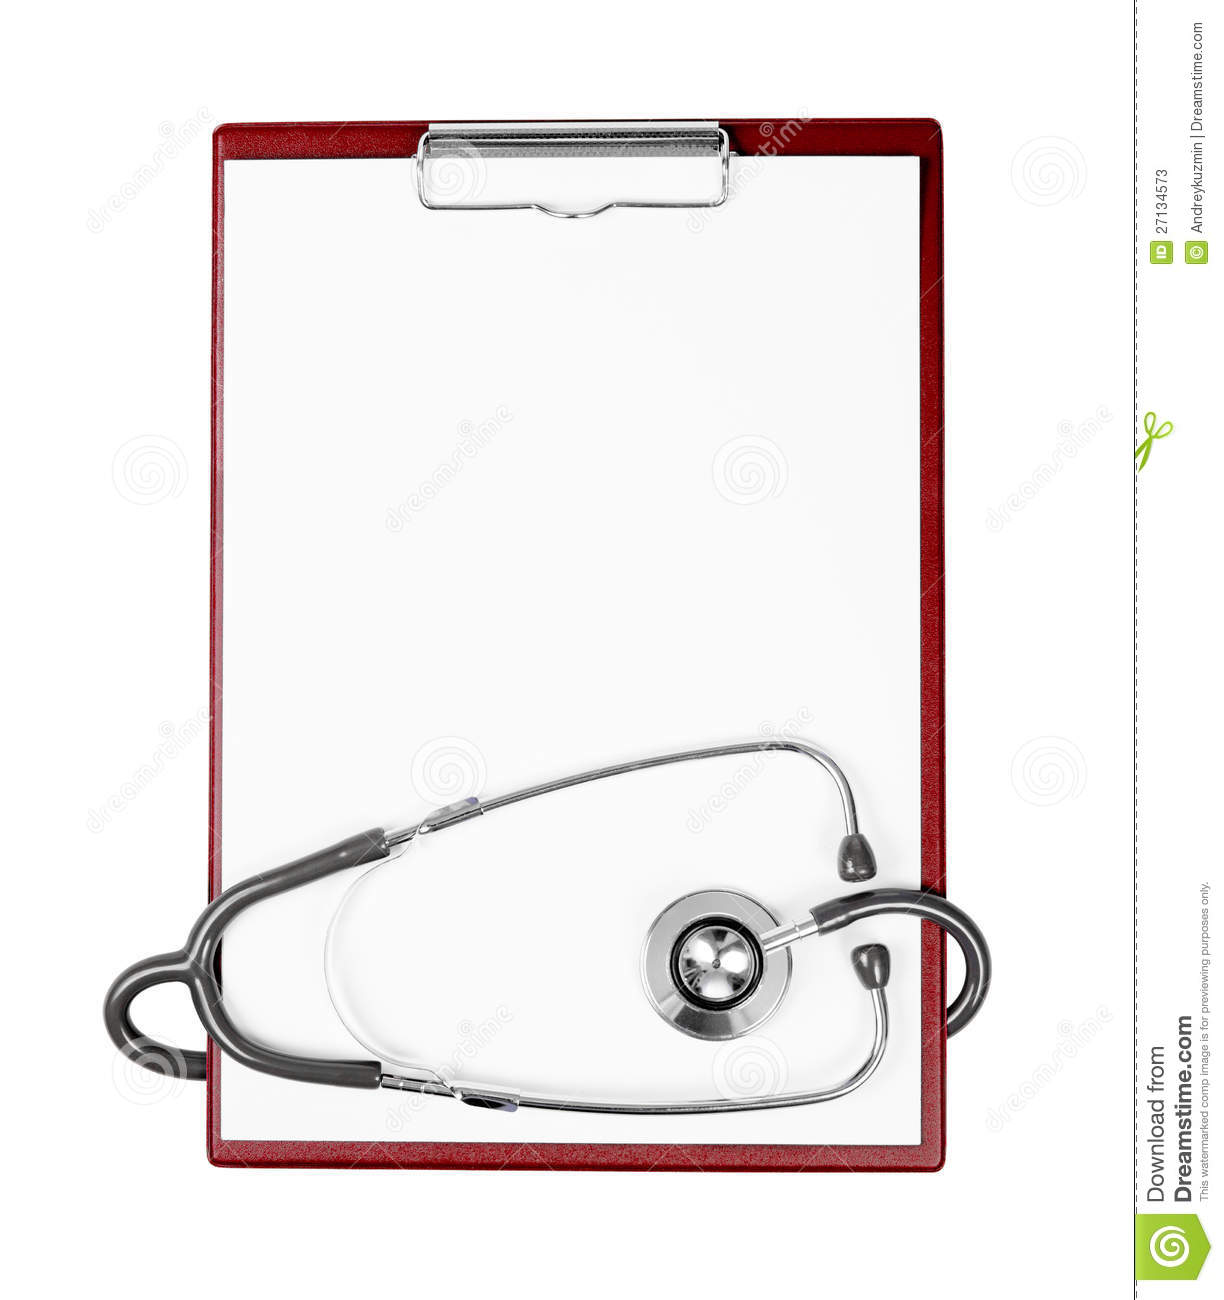 Medical Clipboard With Stethoscope As A Background Stock Photos